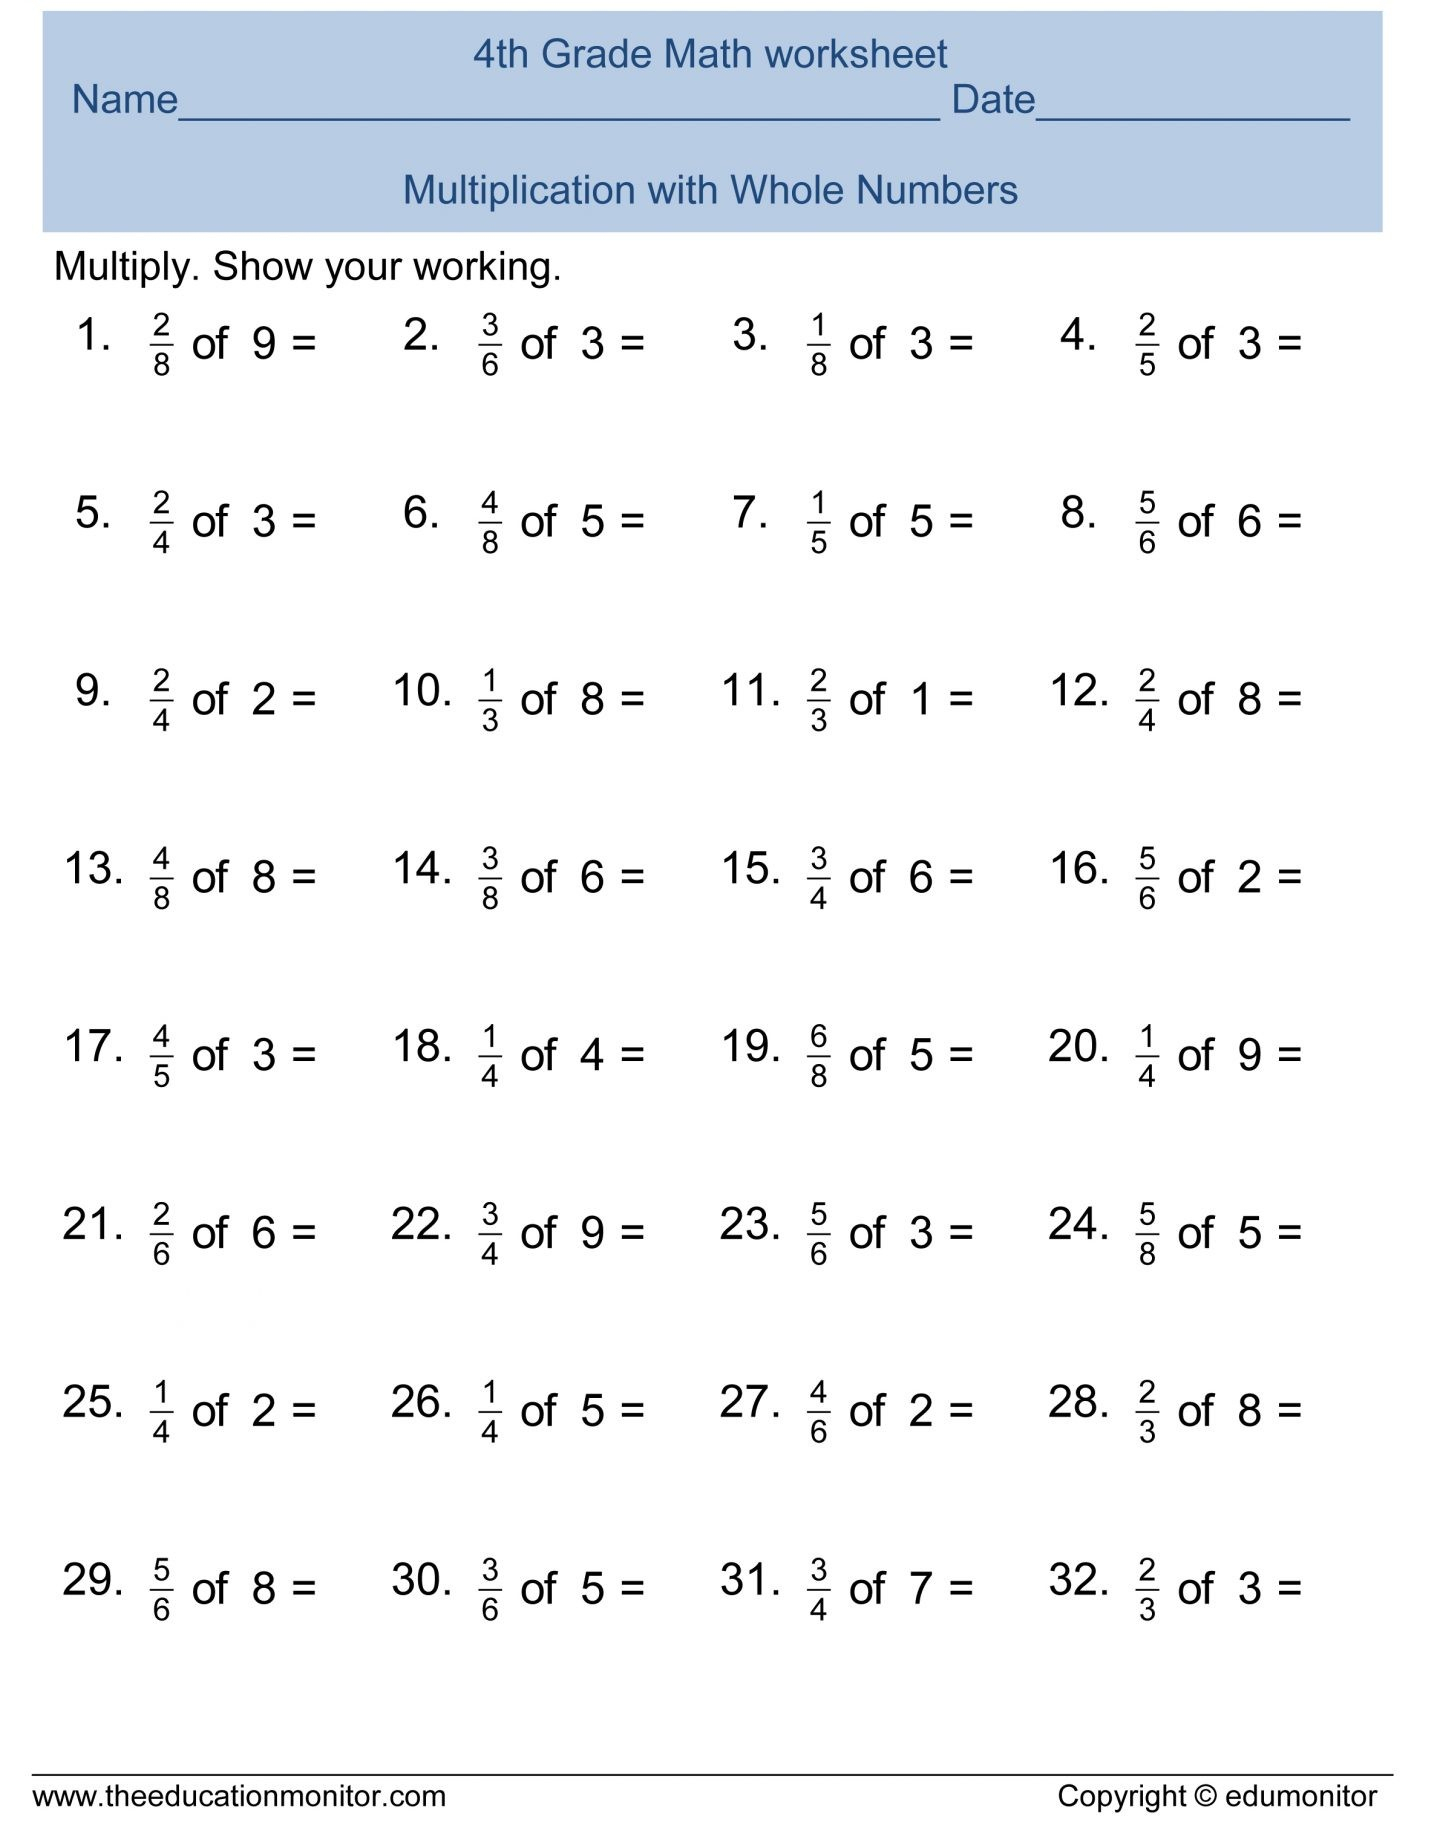 7Th Grade Math Worksheets Free Printable With Answers Stunning - 7Th | 7Th Grade Printable Worksheets